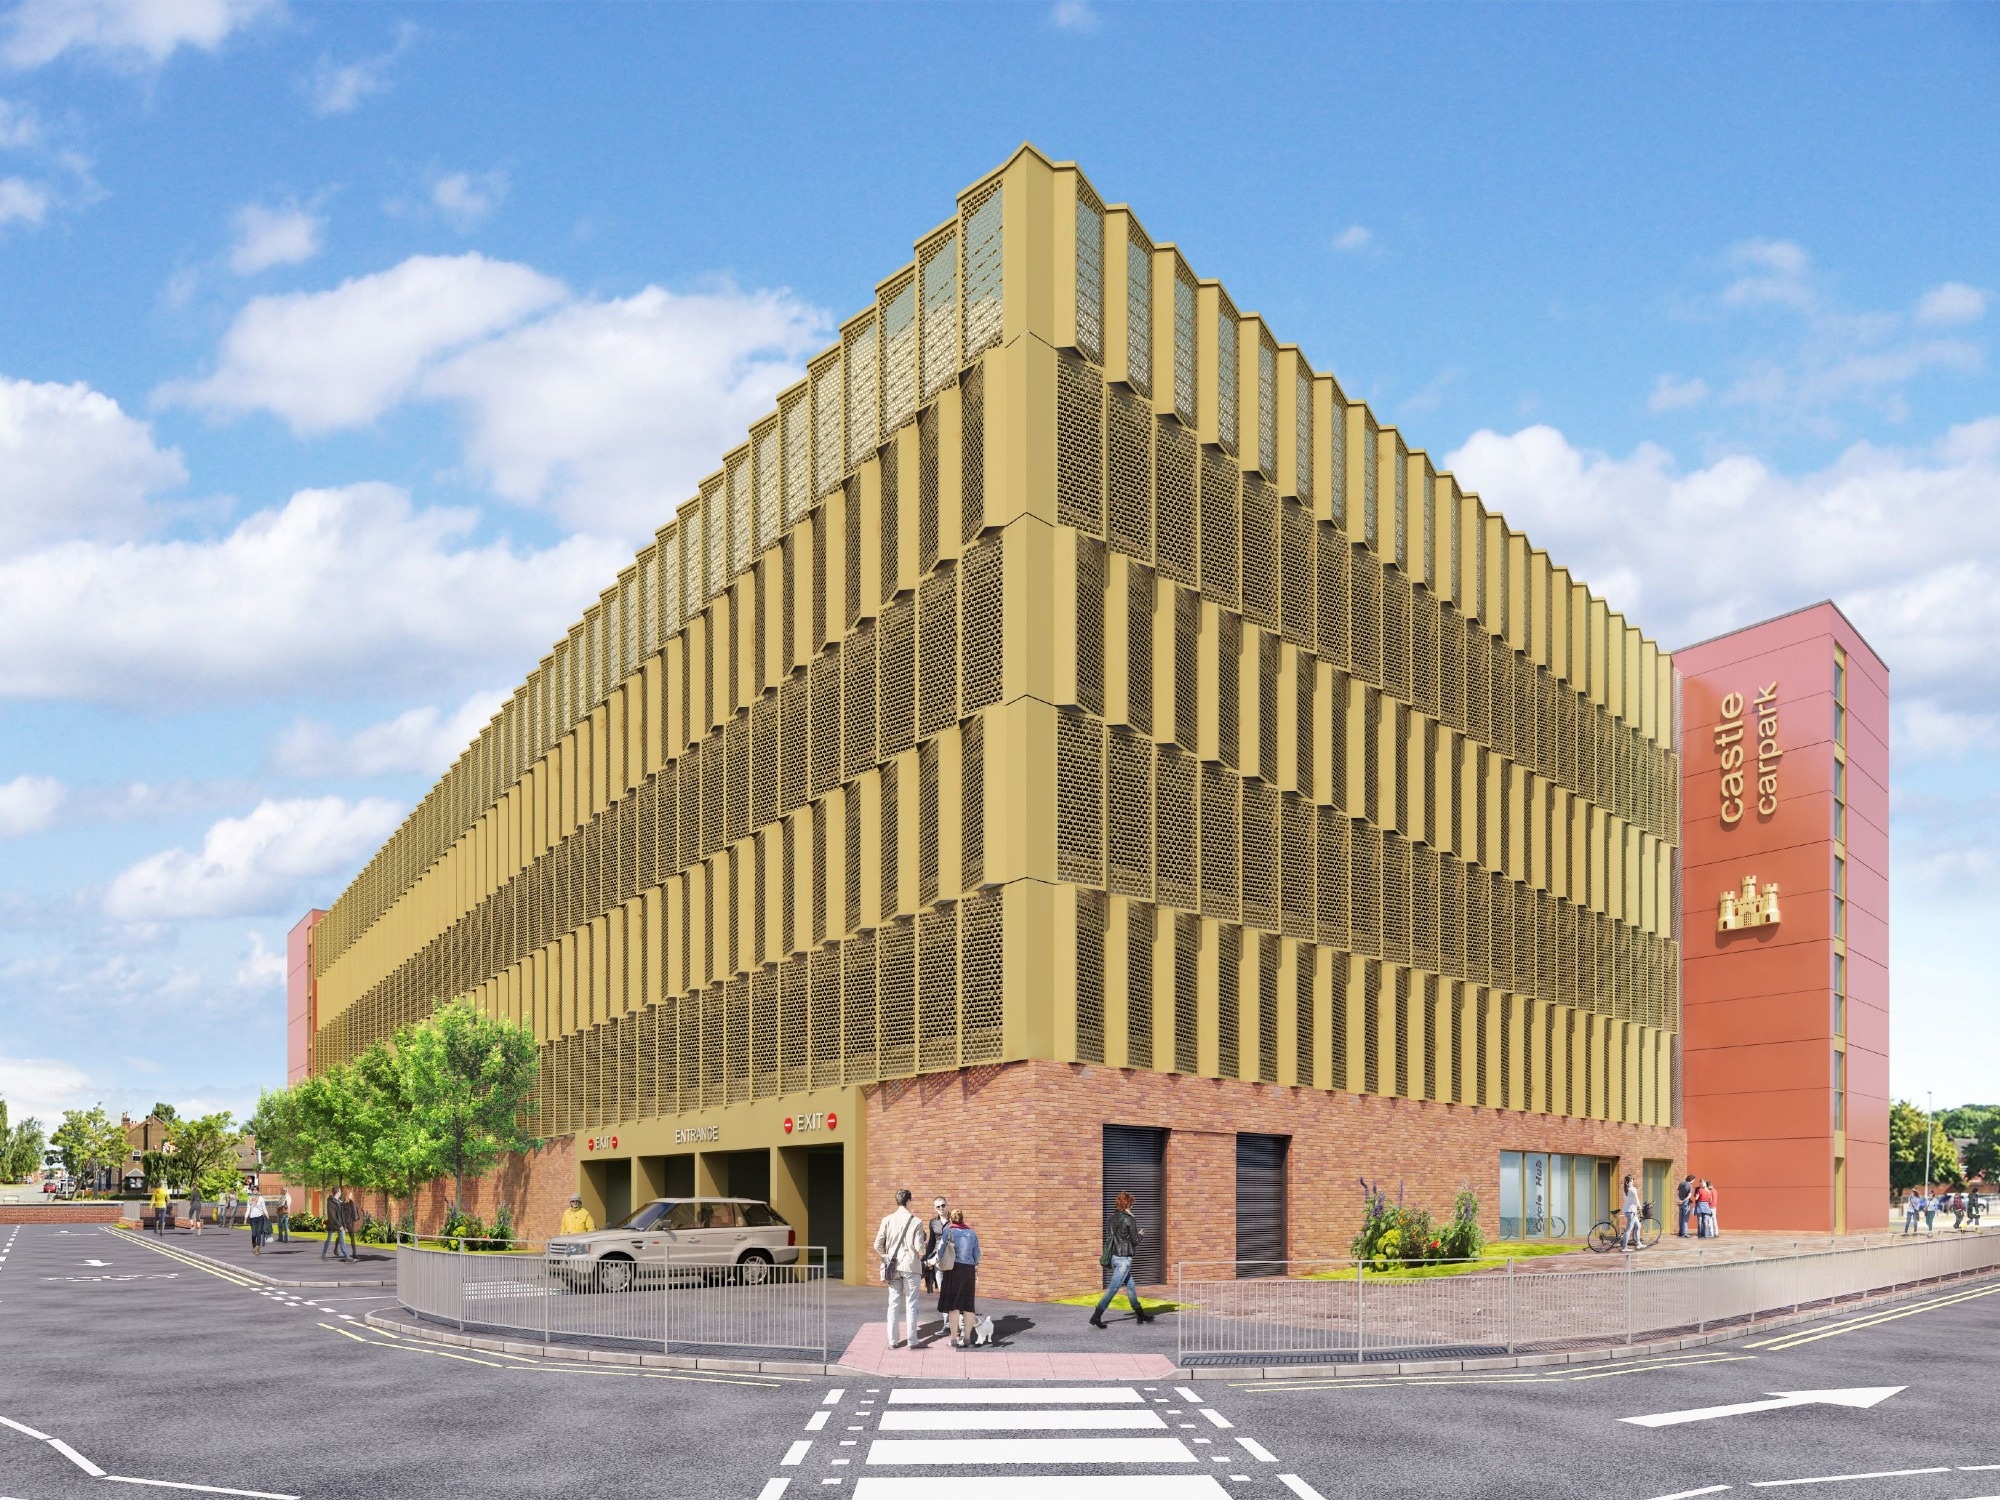 Morgan Sindall Appointed to Newcastle-Under-Lyme Car Ark as Part of Regeneration Plans